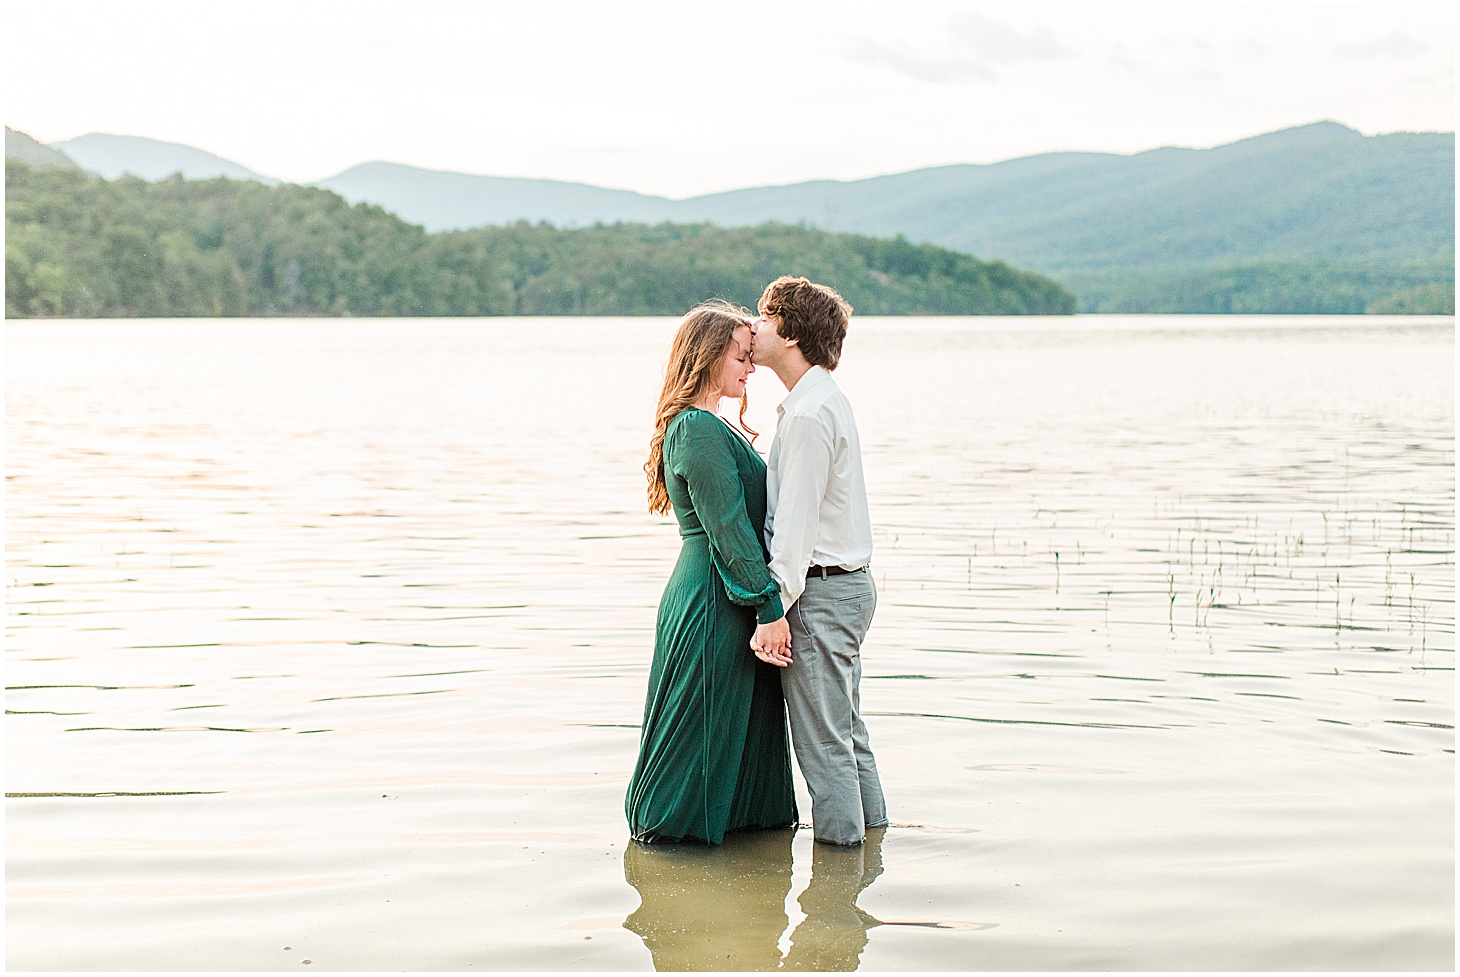 carvinscoveengagementsession_roanokeengagementsession_carvinscove_virginiawedding_virginiaweddingphotographer_vaweddingphotographer_photo_0068.jpg